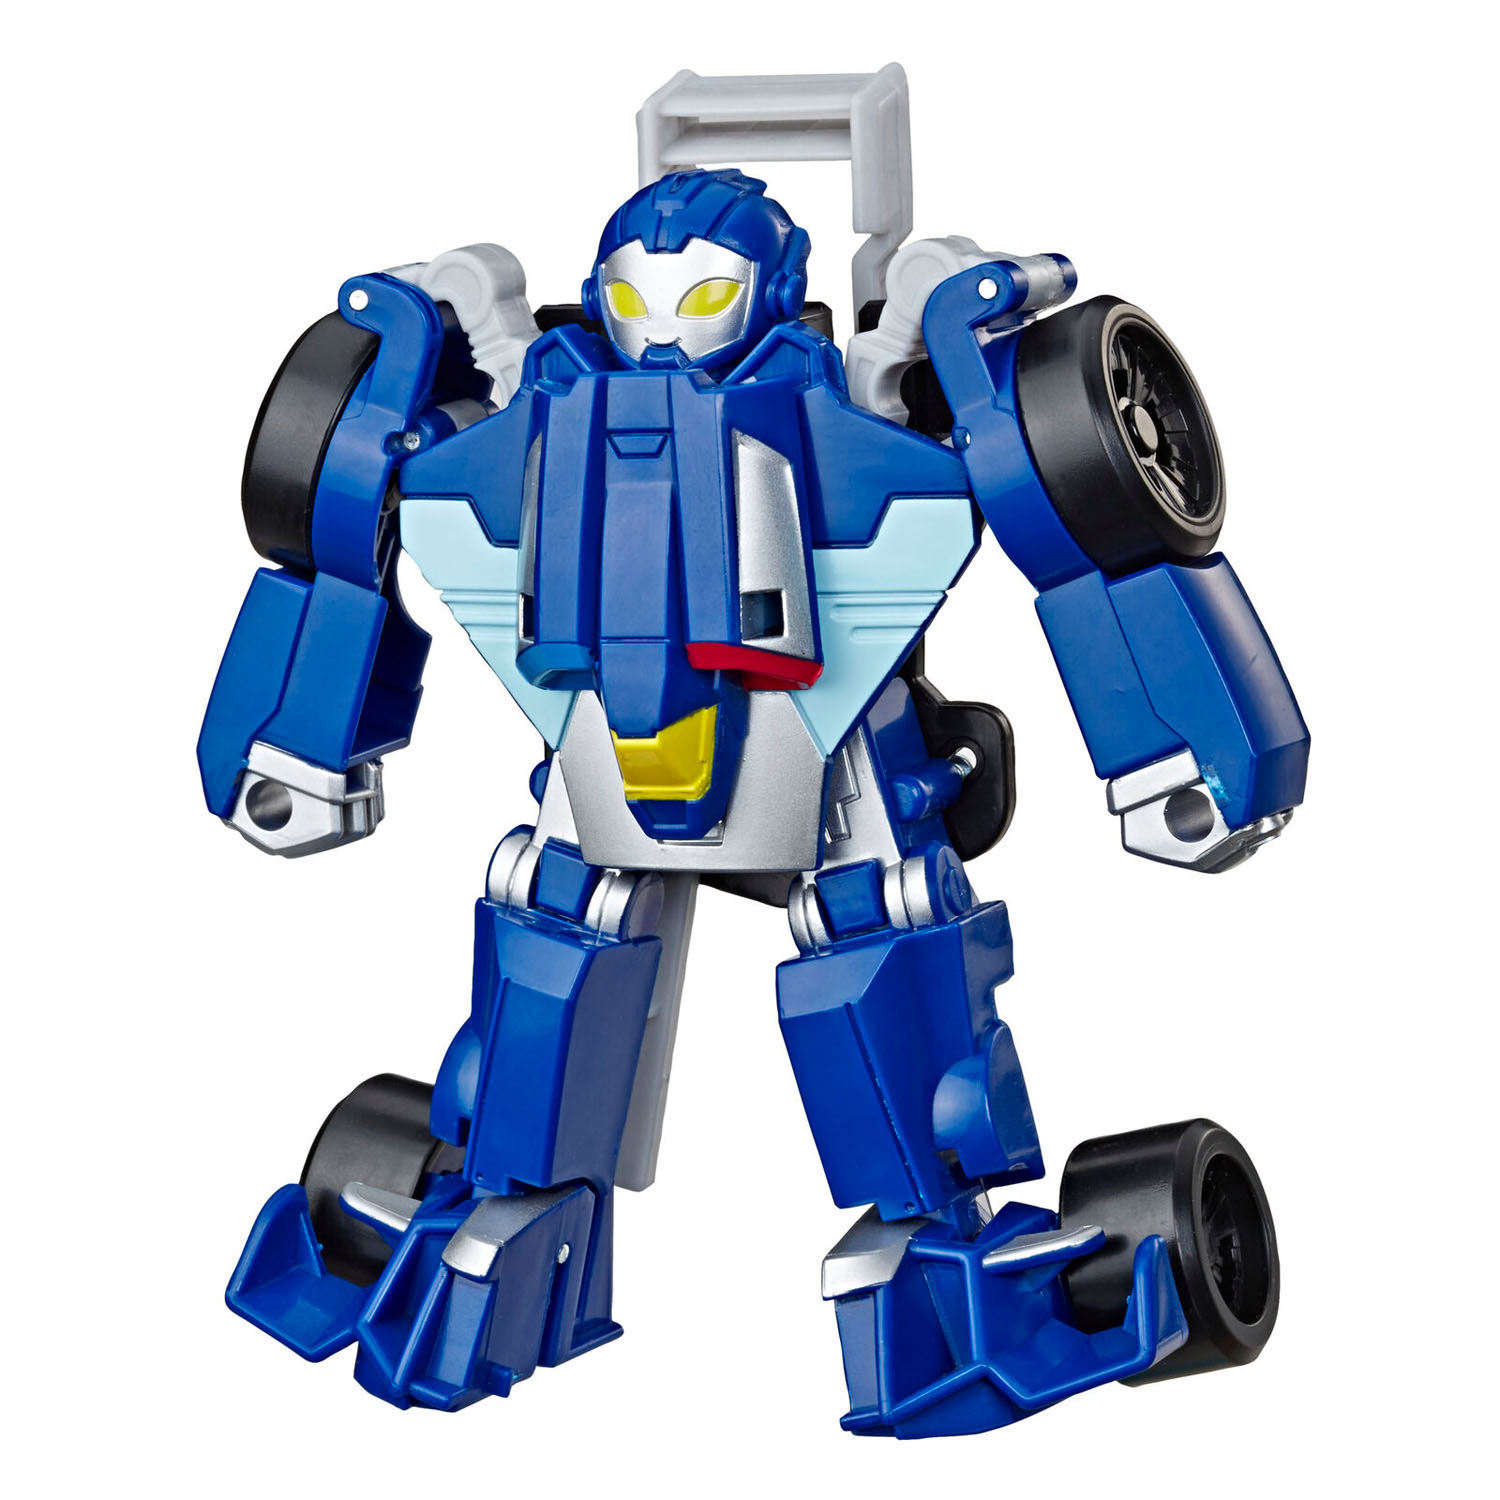 Transformers Rescue Bots Academy – Whirl the Flight